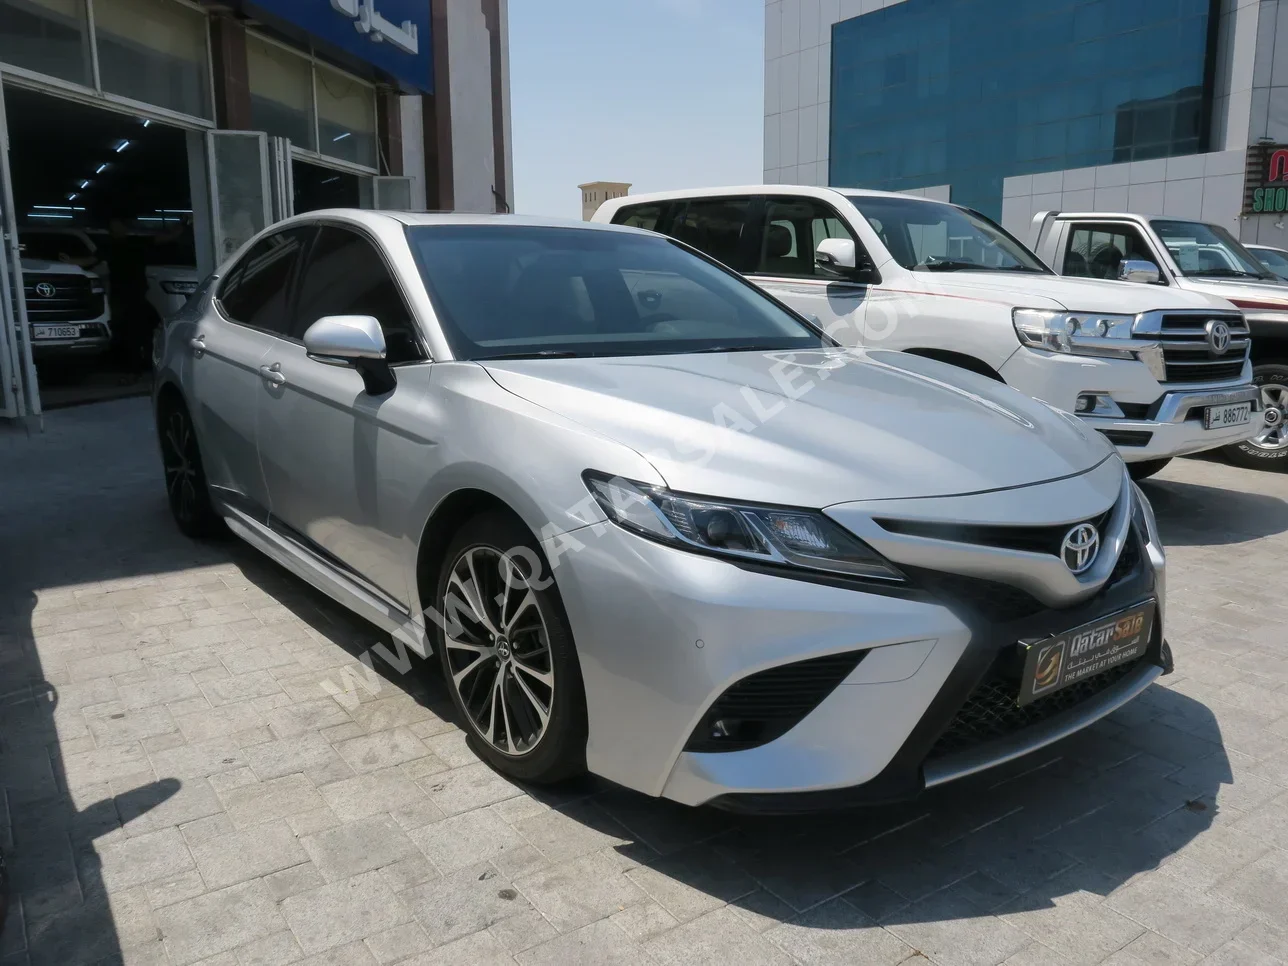 Toyota  Camry  GLX  2019  Automatic  166,000 Km  4 Cylinder  Front Wheel Drive (FWD)  Sedan  Silver